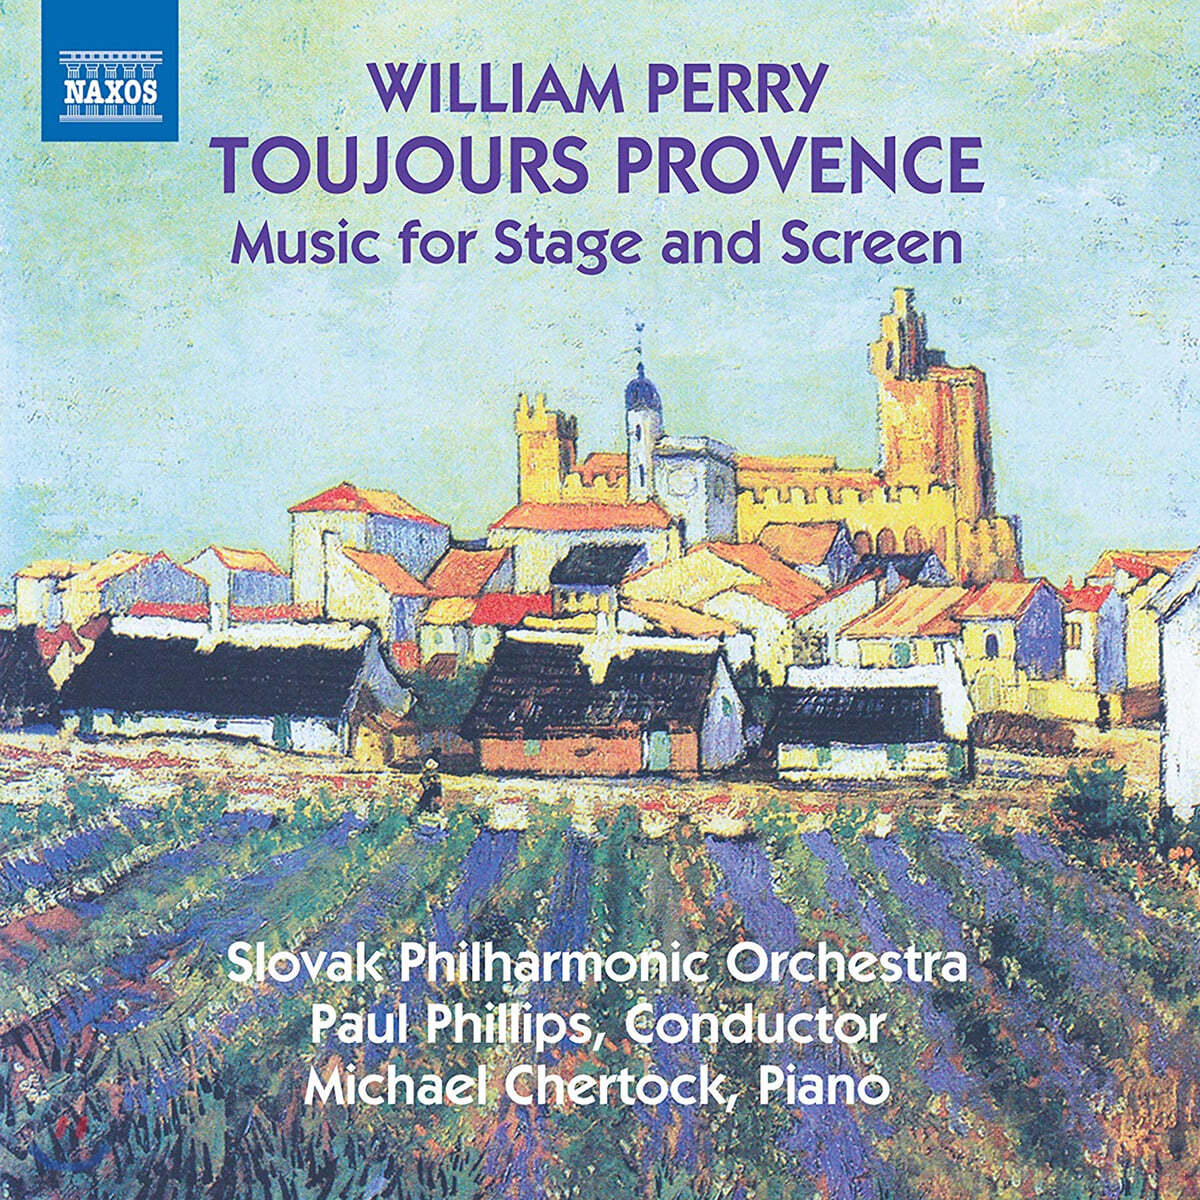 Paul Phillips 윌리엄 페리: 극음악 / 영화 음악 작품집 (William Perry: Toujours Provence - Music for Stage and Screen)